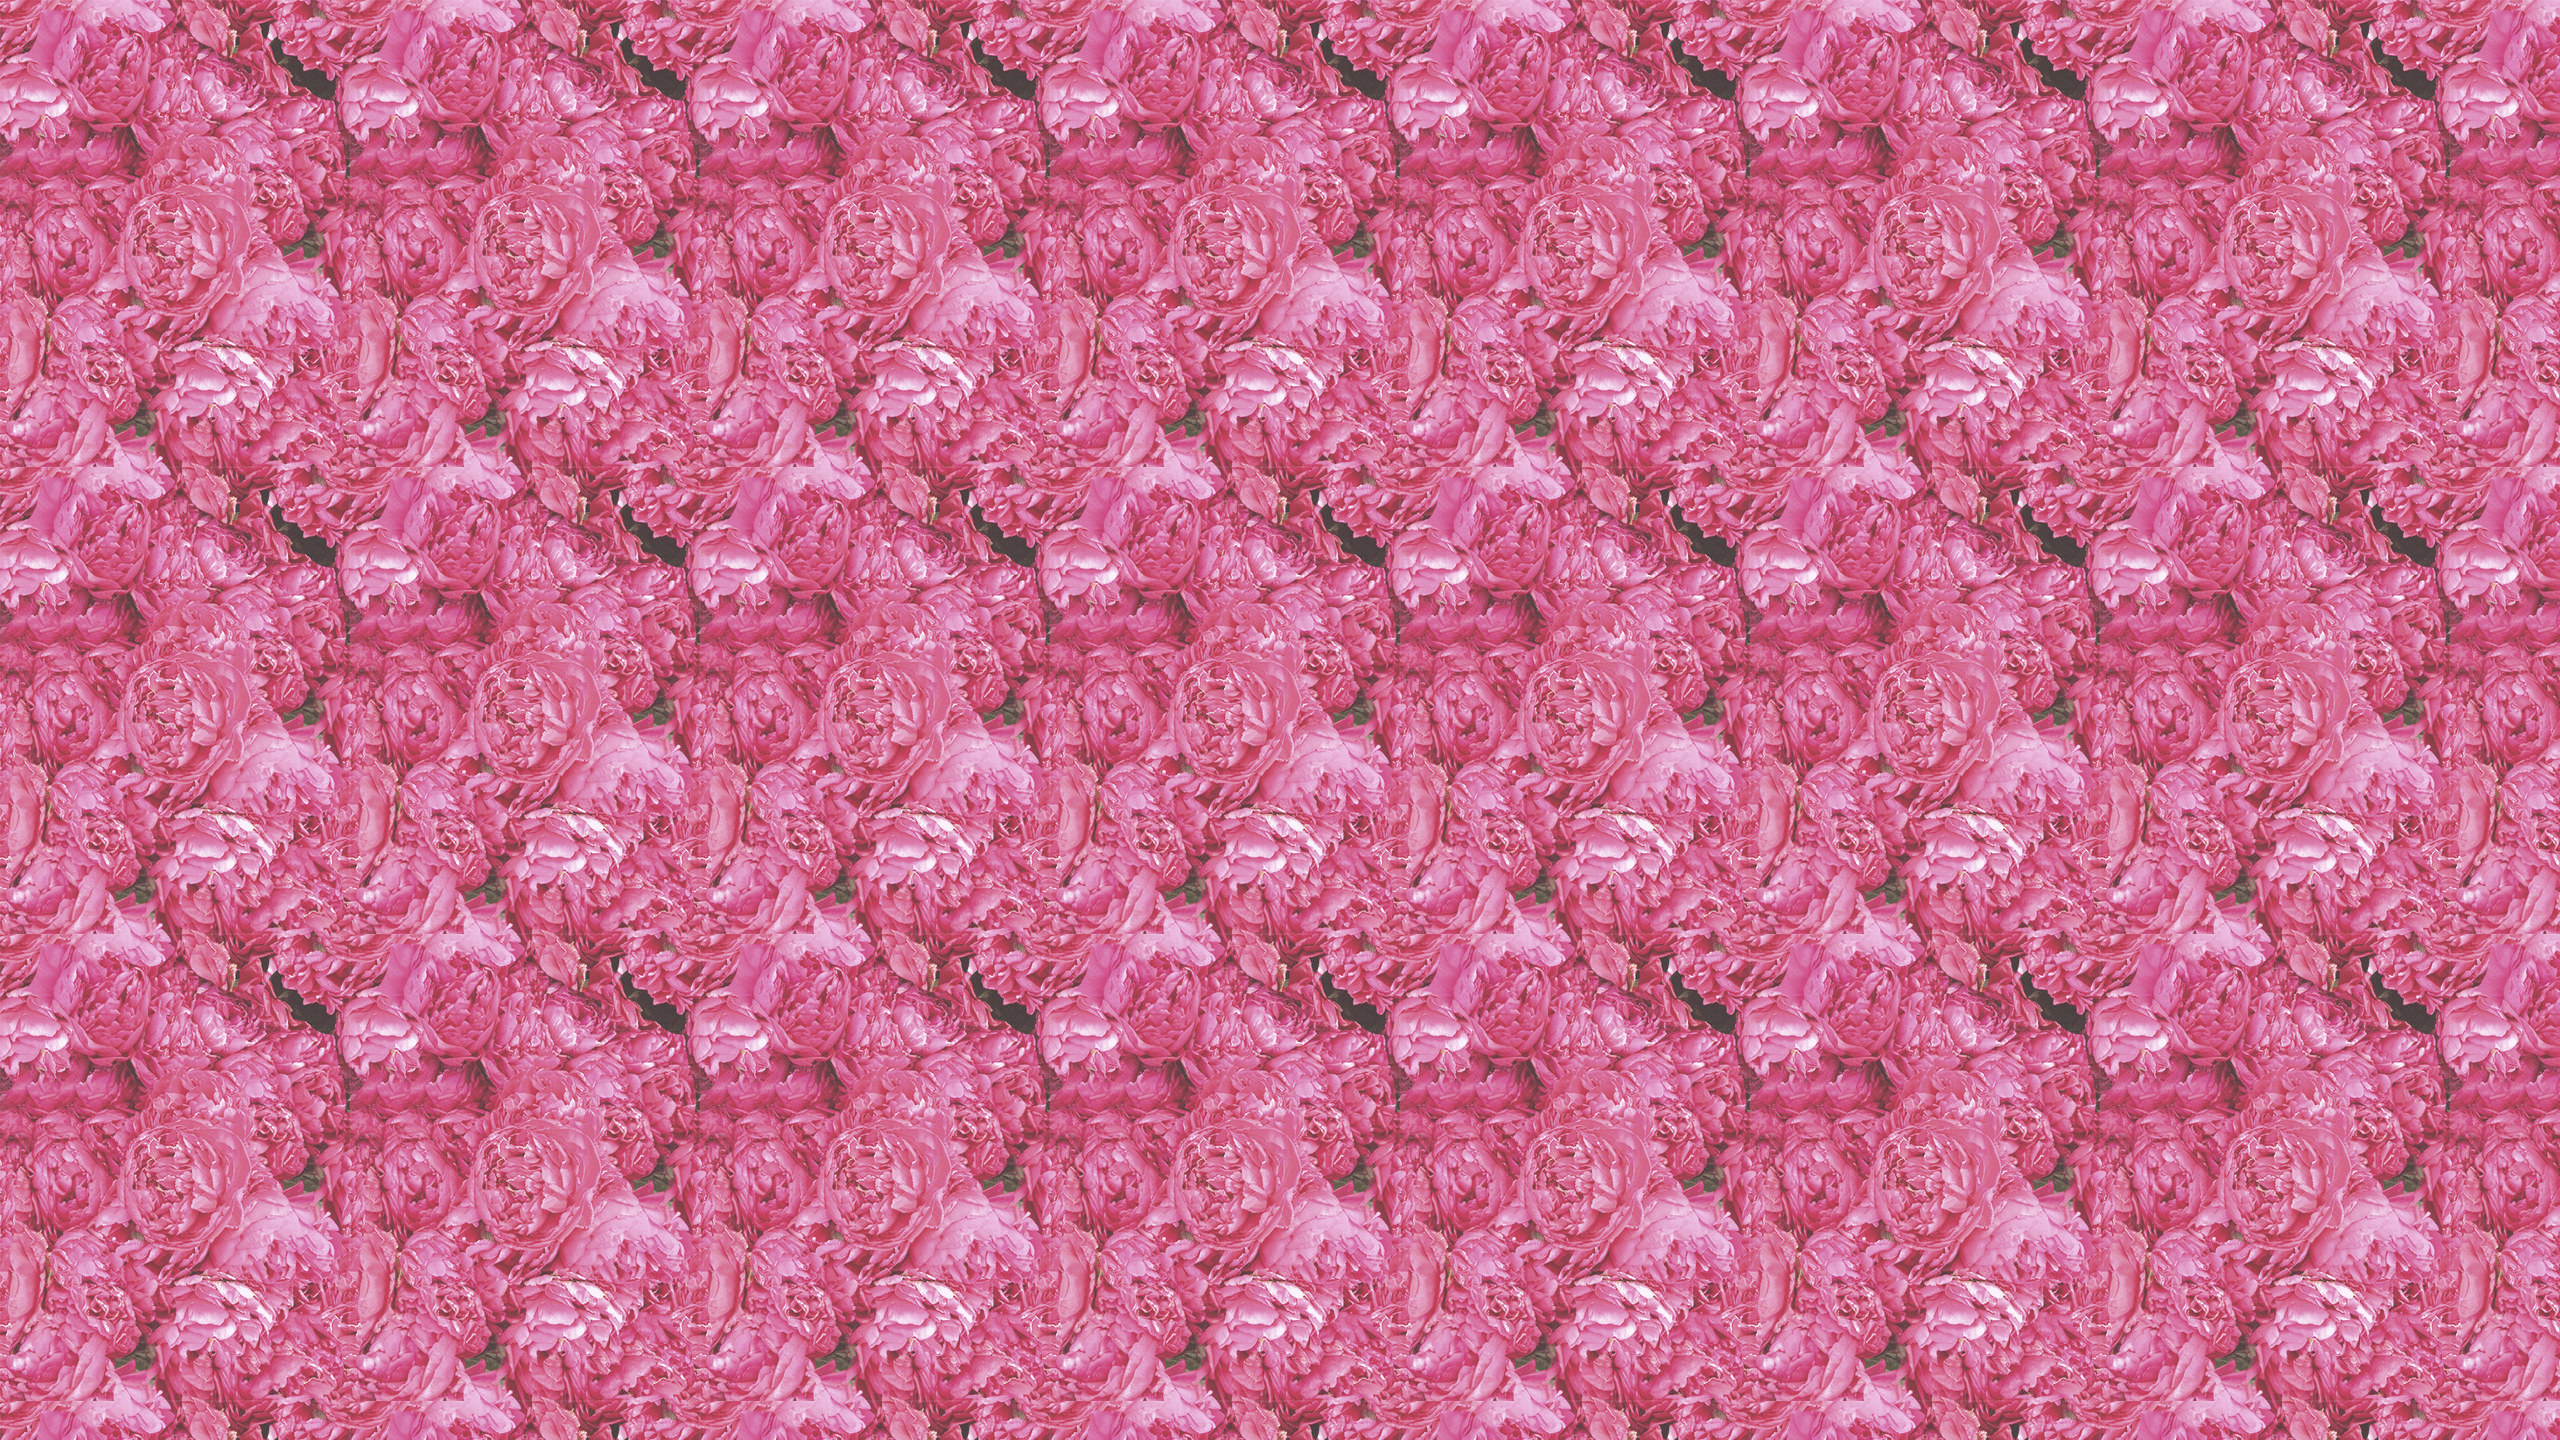 This Pink Hydrangea Desktop Wallpaper Is Easy Just Save The